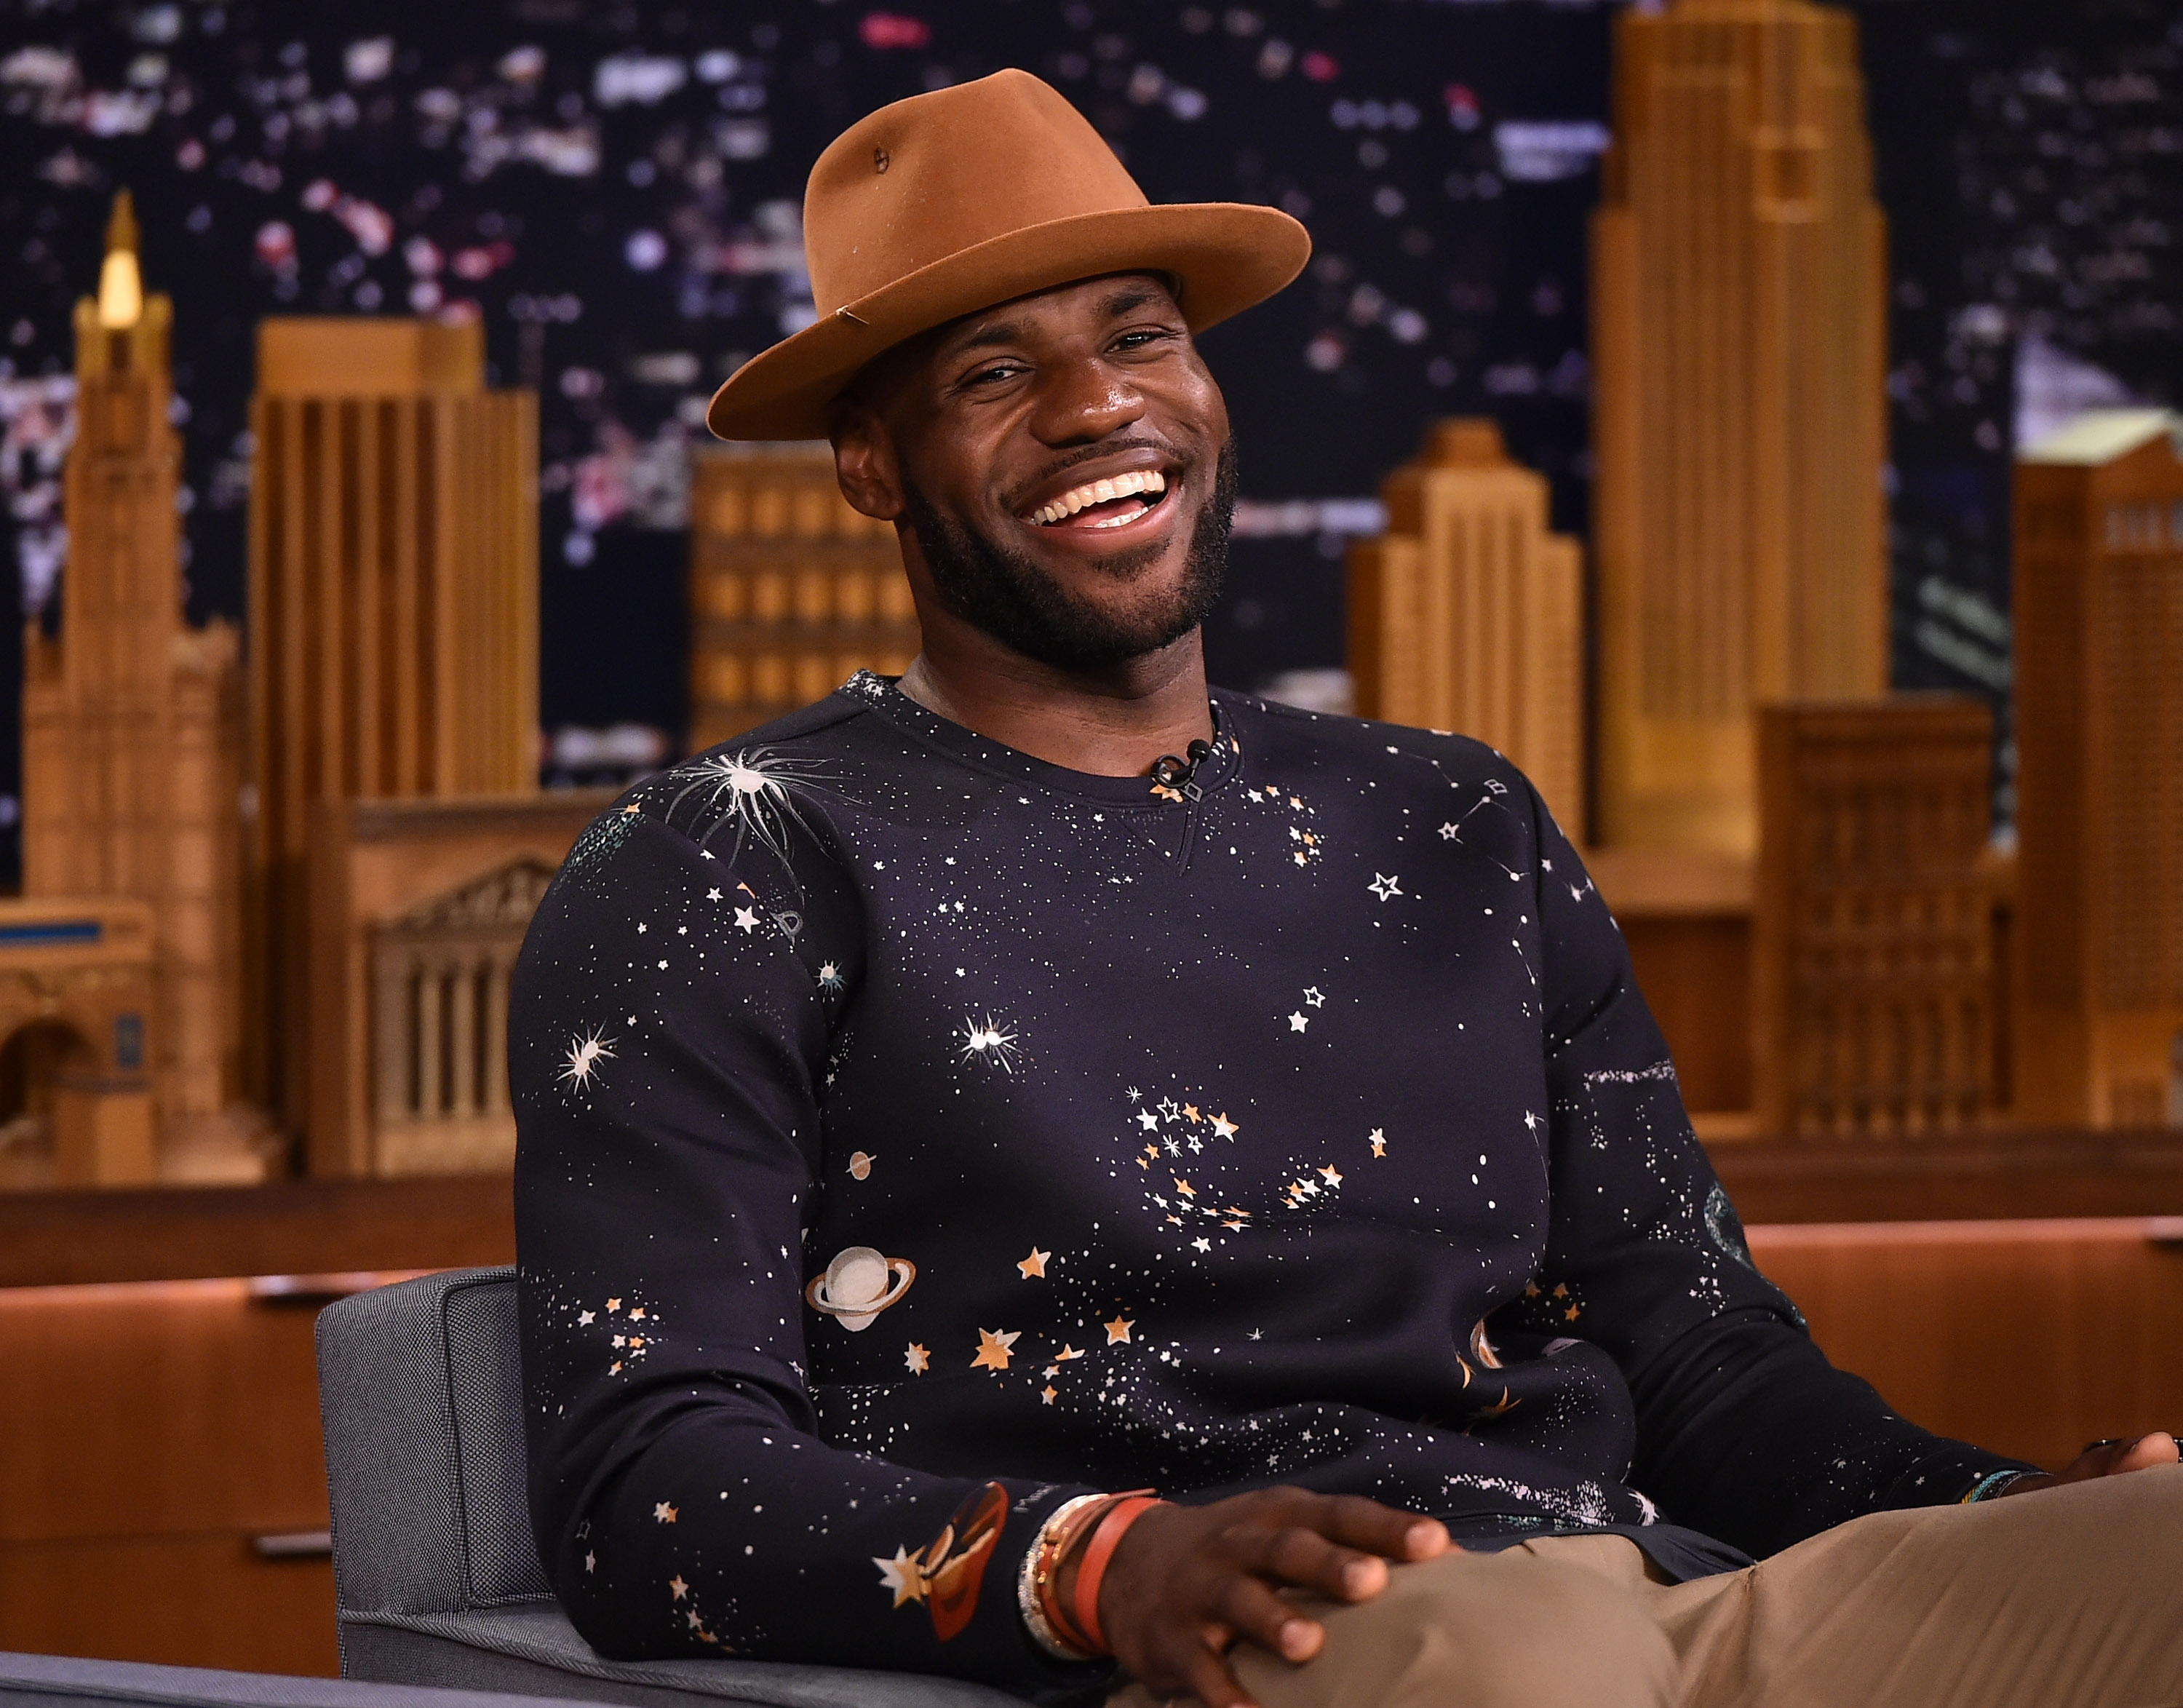 LeBron James giving an interview to Jimmy Fallon